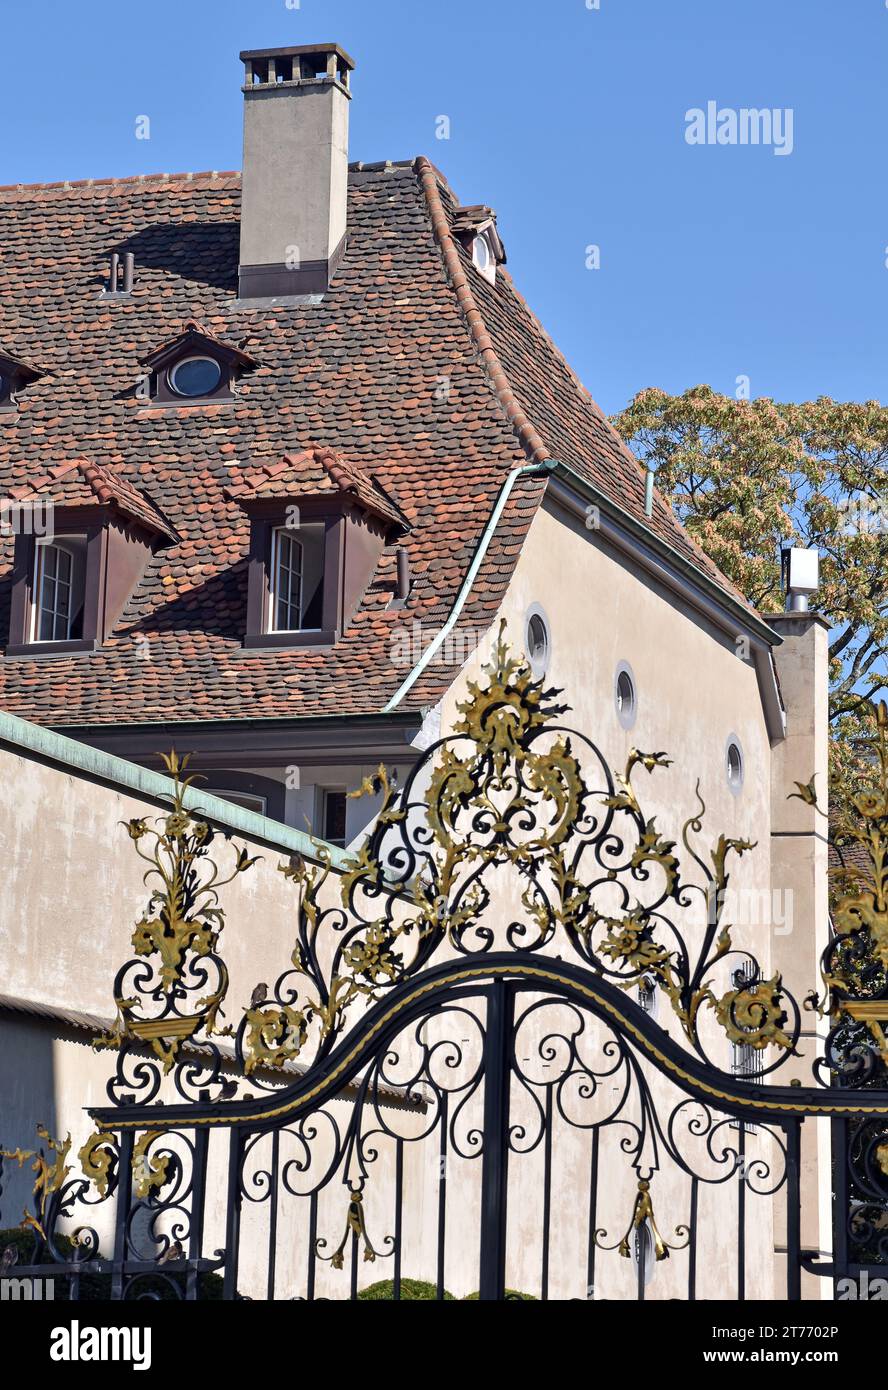 Elegant wrought iron gates topped with elaborate gilded work, and beyond a tiled gabled roof with several gabled windows Stock Photo